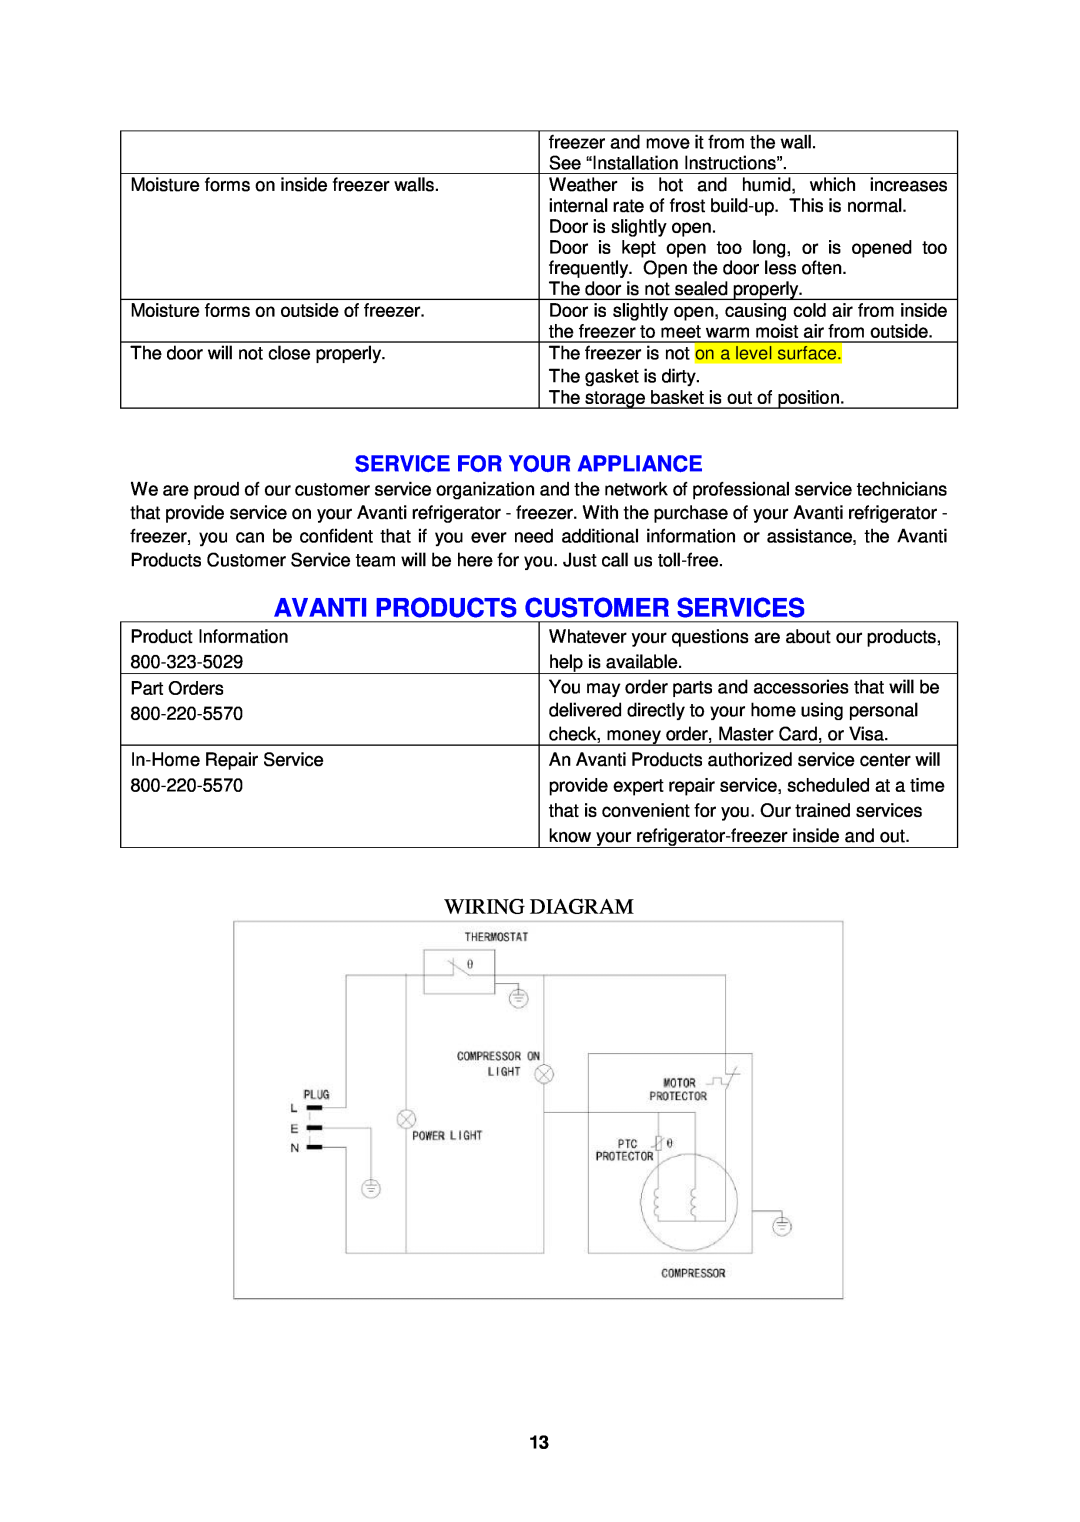 Avanti CF1010, CF1510, CF2010 Service For Your Appliance, Avanti Products Customer Services, Wiring Diagram 